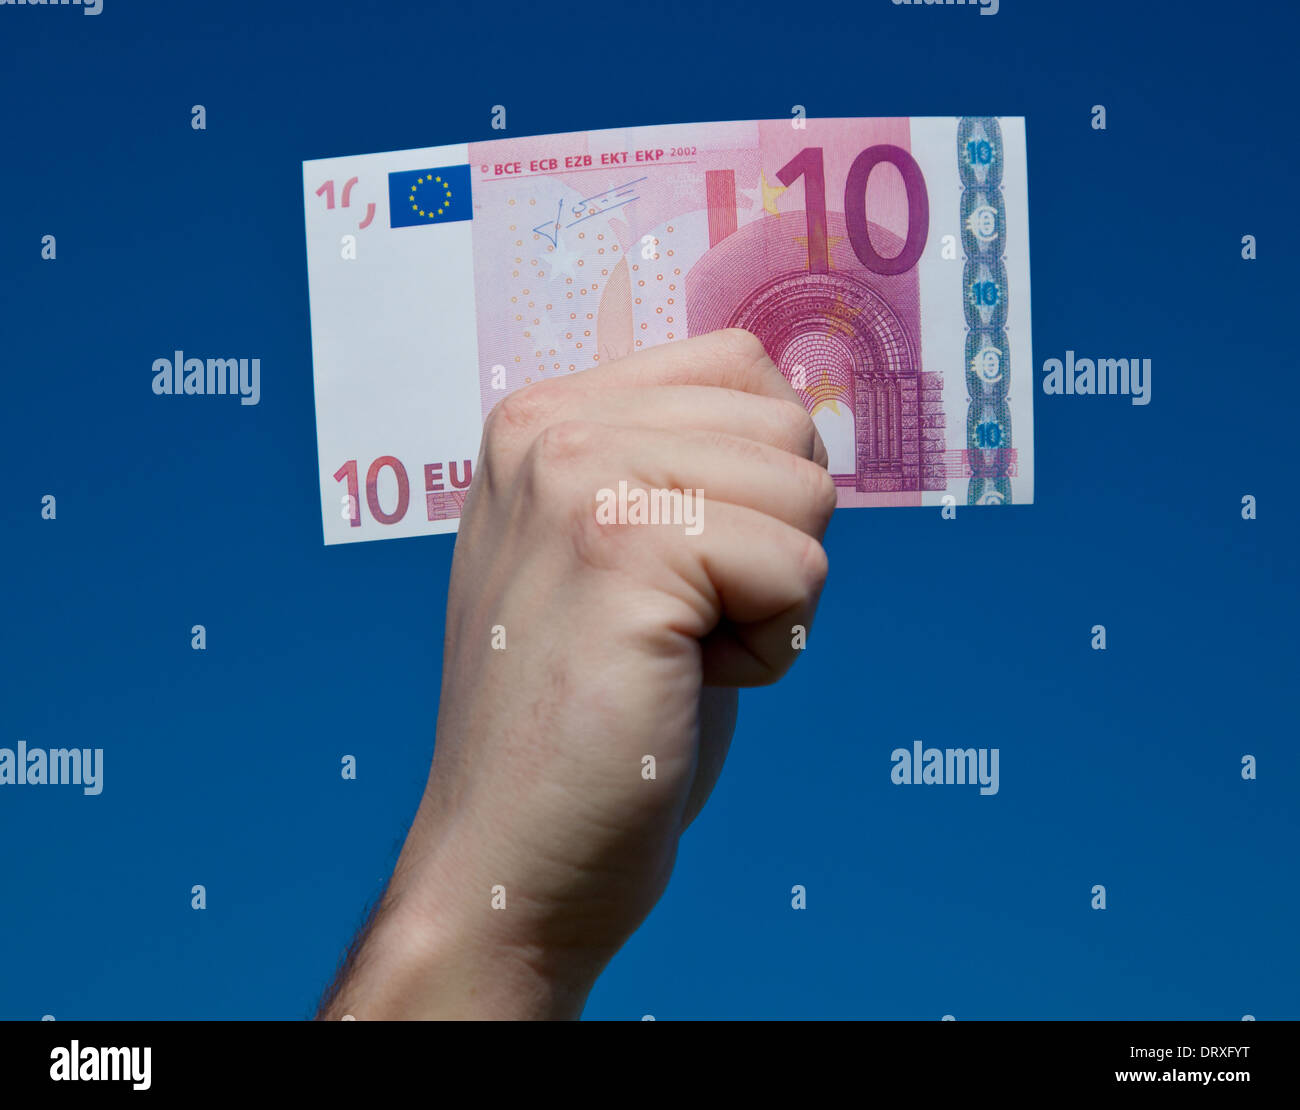 Hand holding 10 euro note in front of bright blue sky. Stock Photo